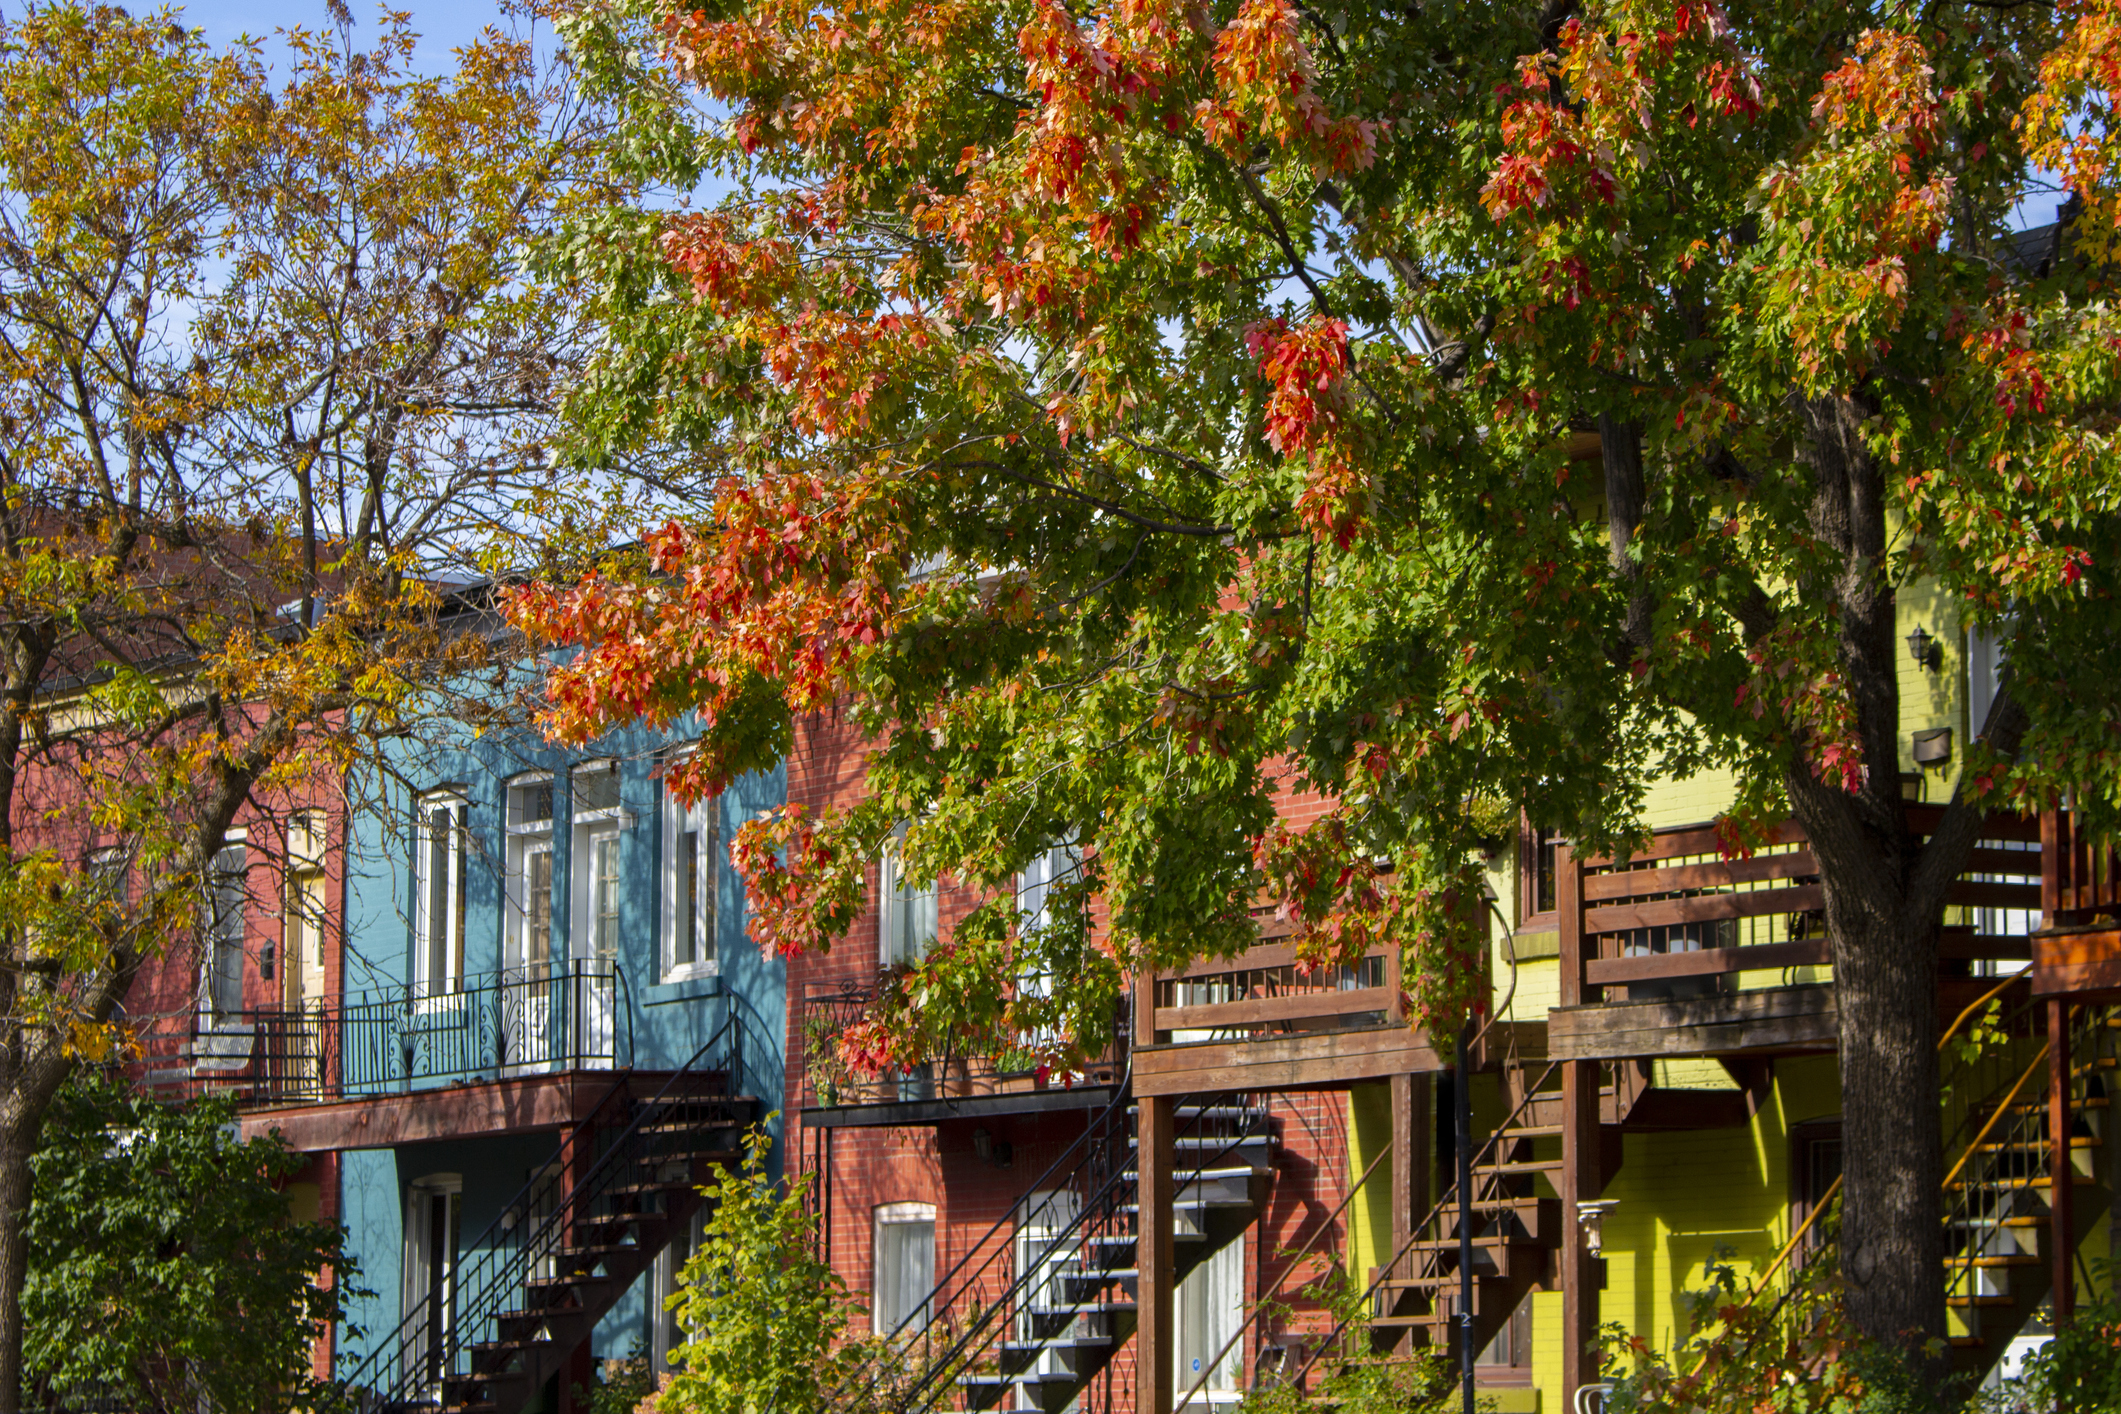 Row of colorful houses with external staircases, surrounded by autumn foliage